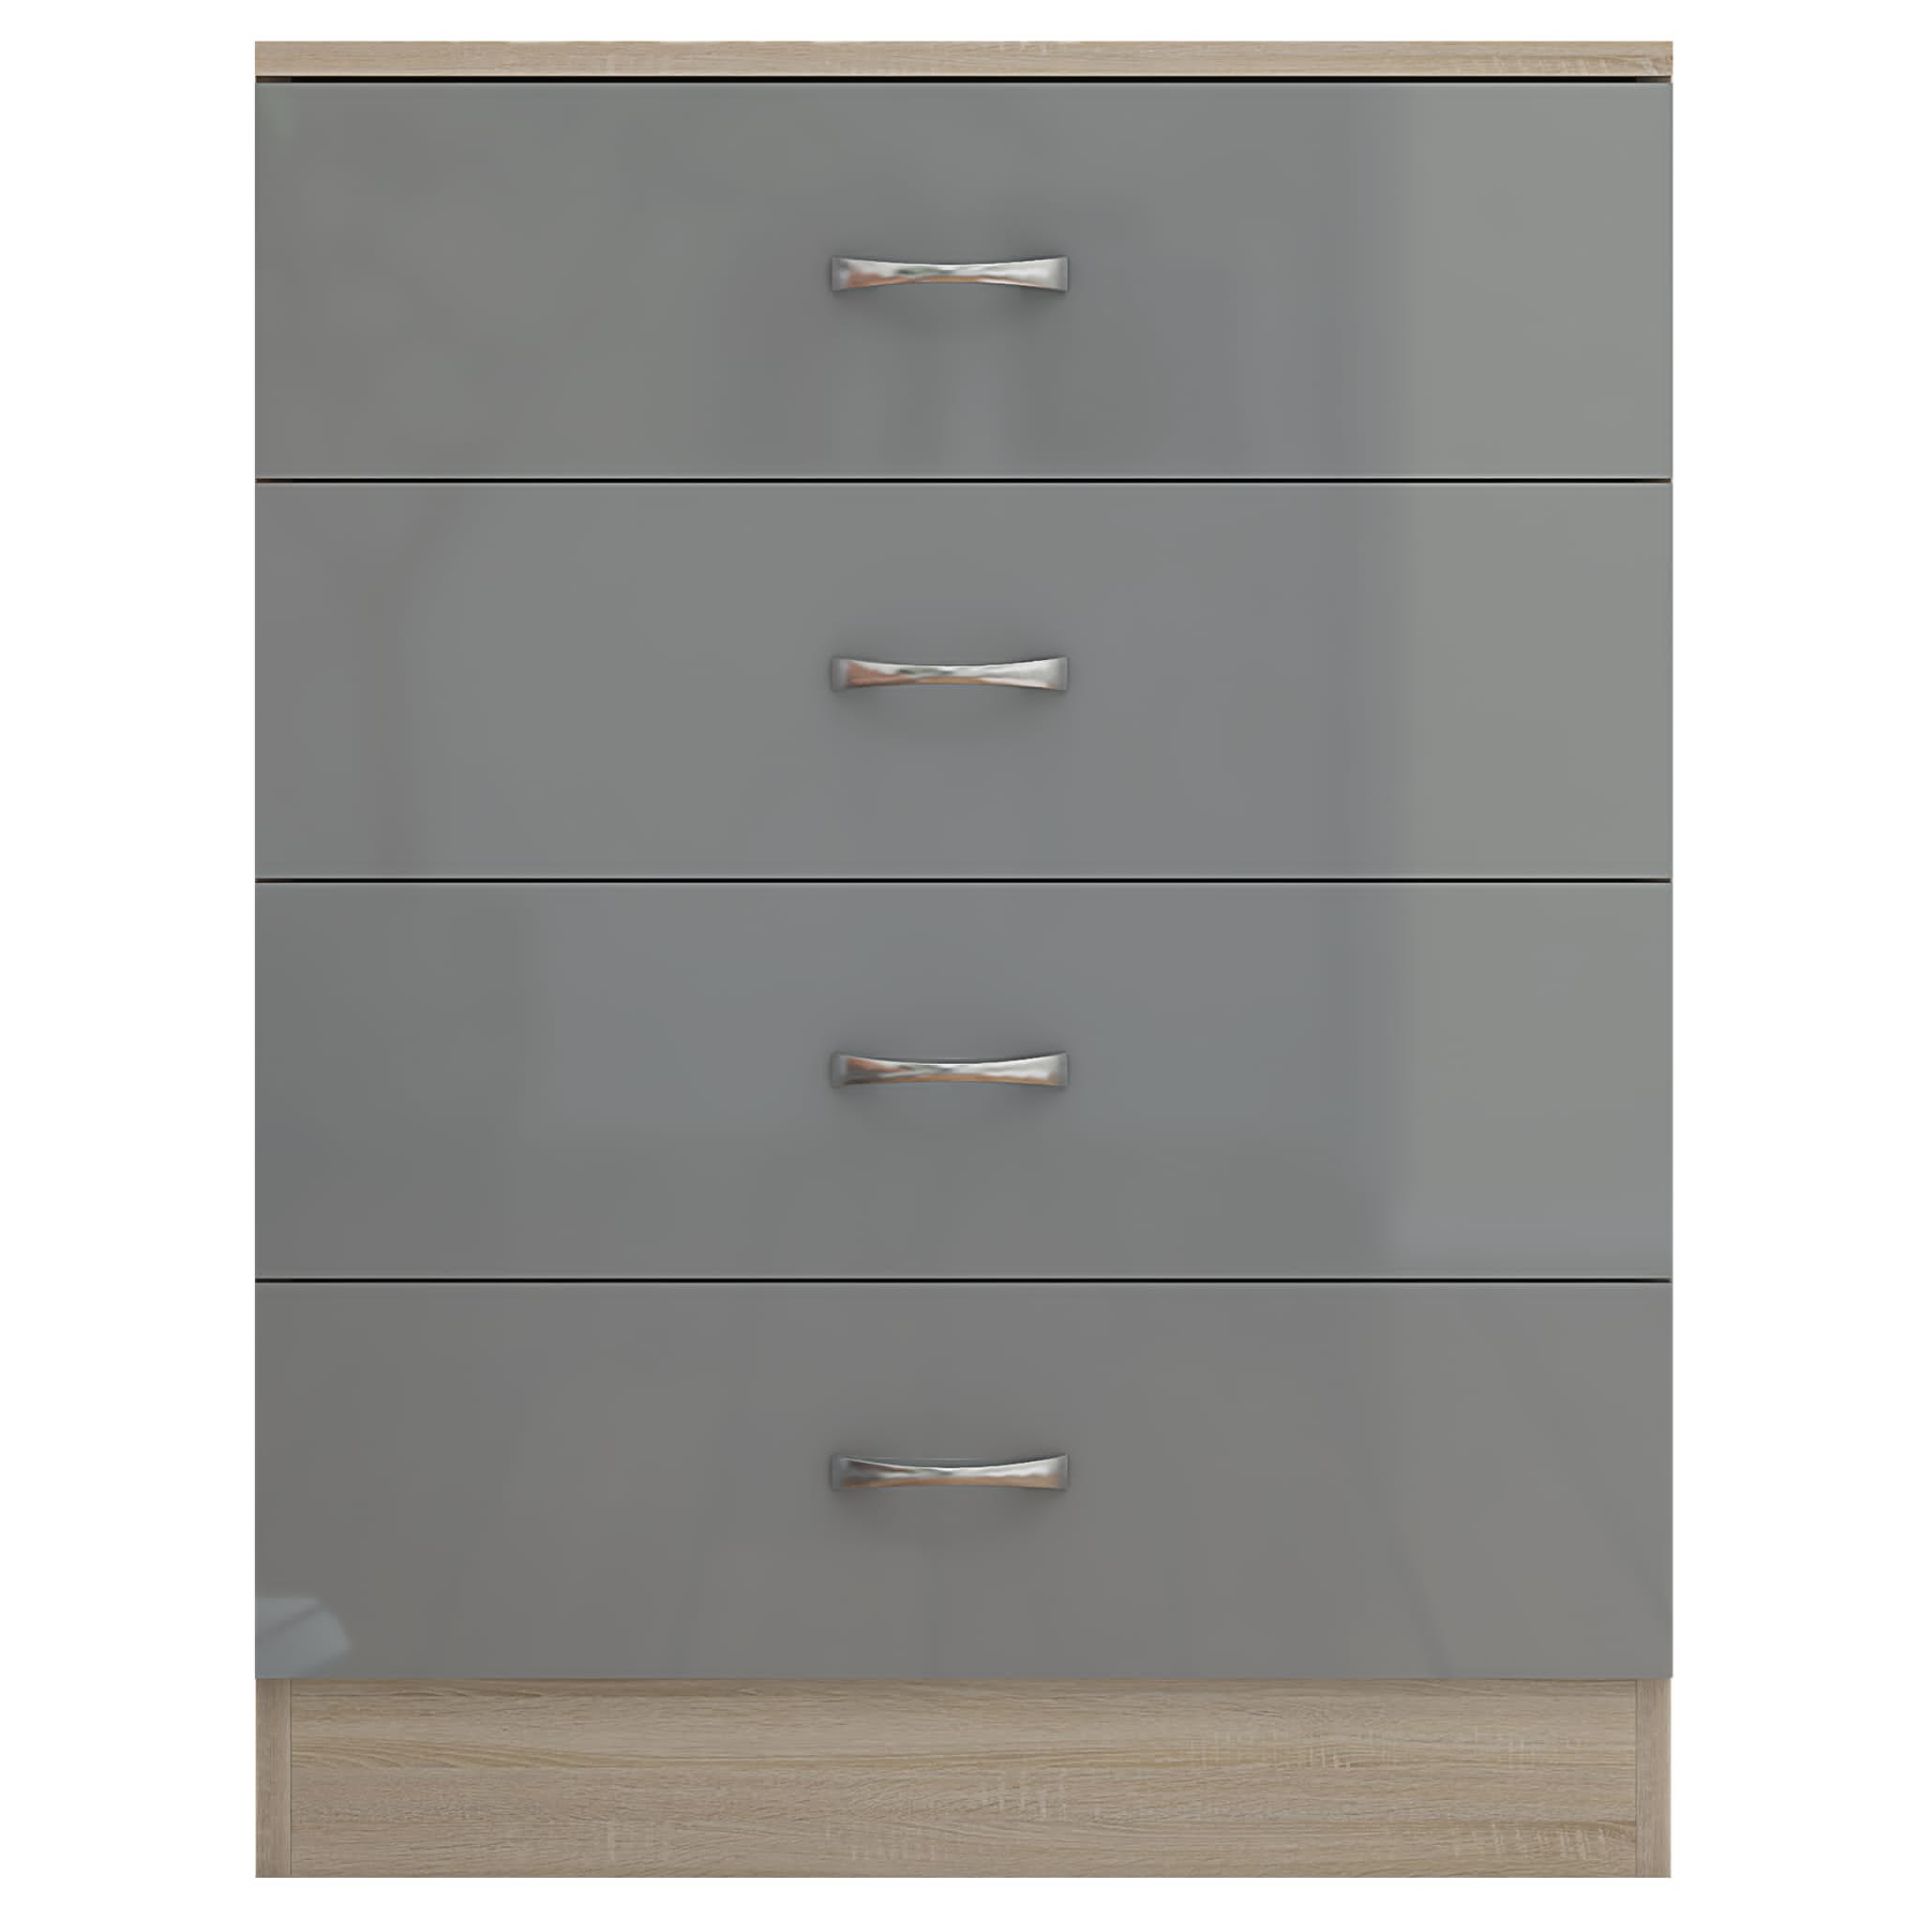 10 X 4 DRAWER CHESTS - HIGH GLOSS GREY ON SONOMA OAK FRAME BRAND NEW BOXED - Image 4 of 9